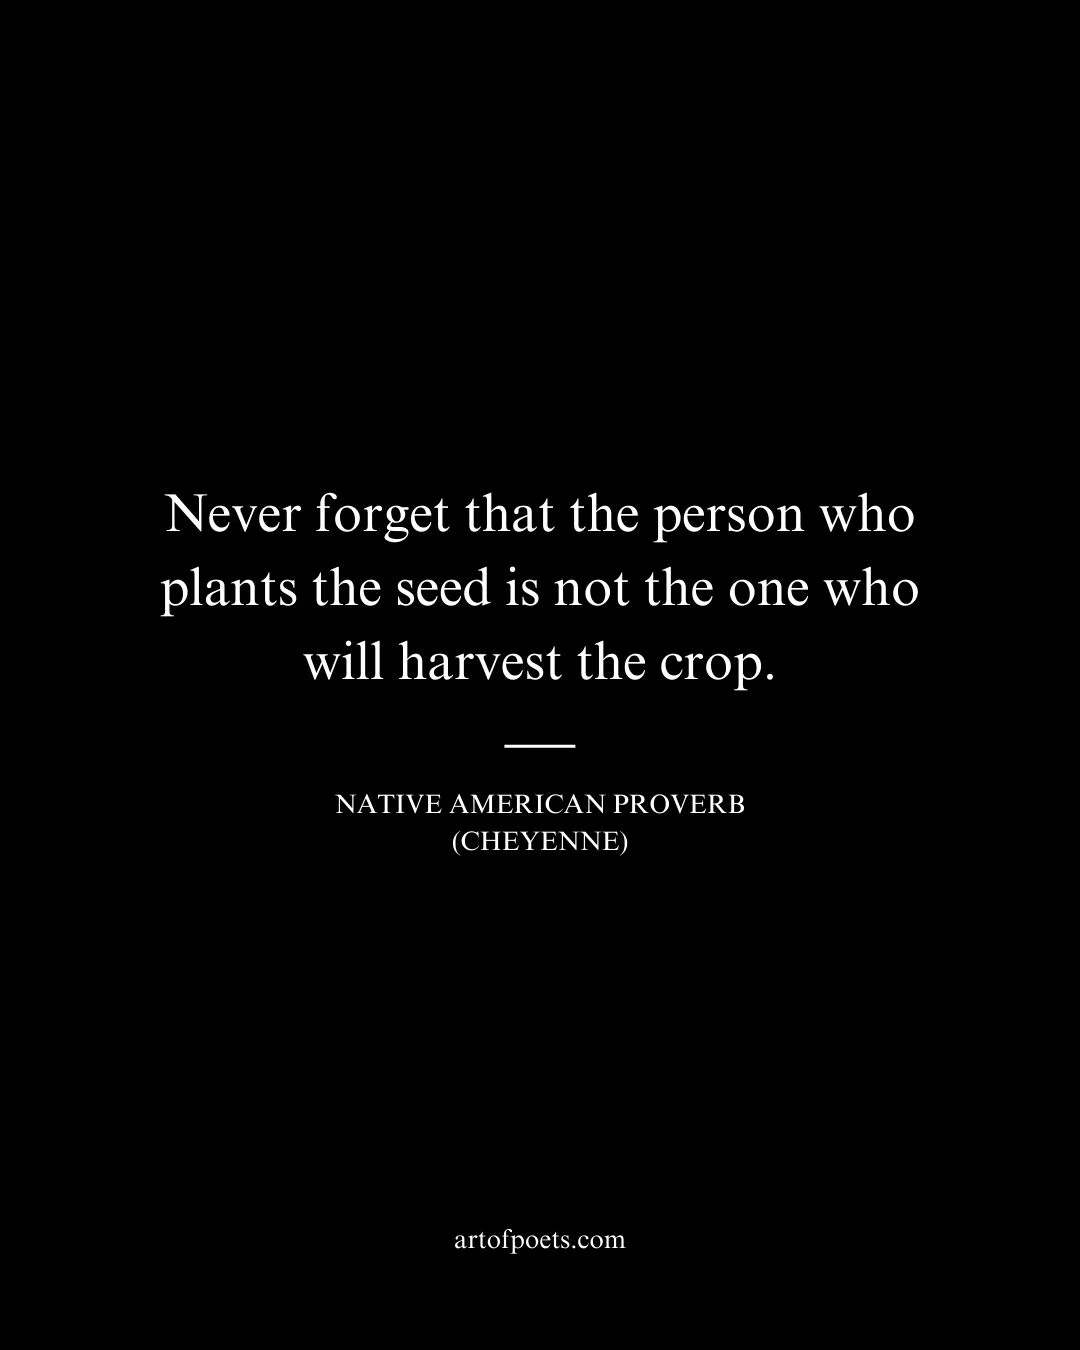 Never forget that the person who plants the seed is not the one who will harvest the crop